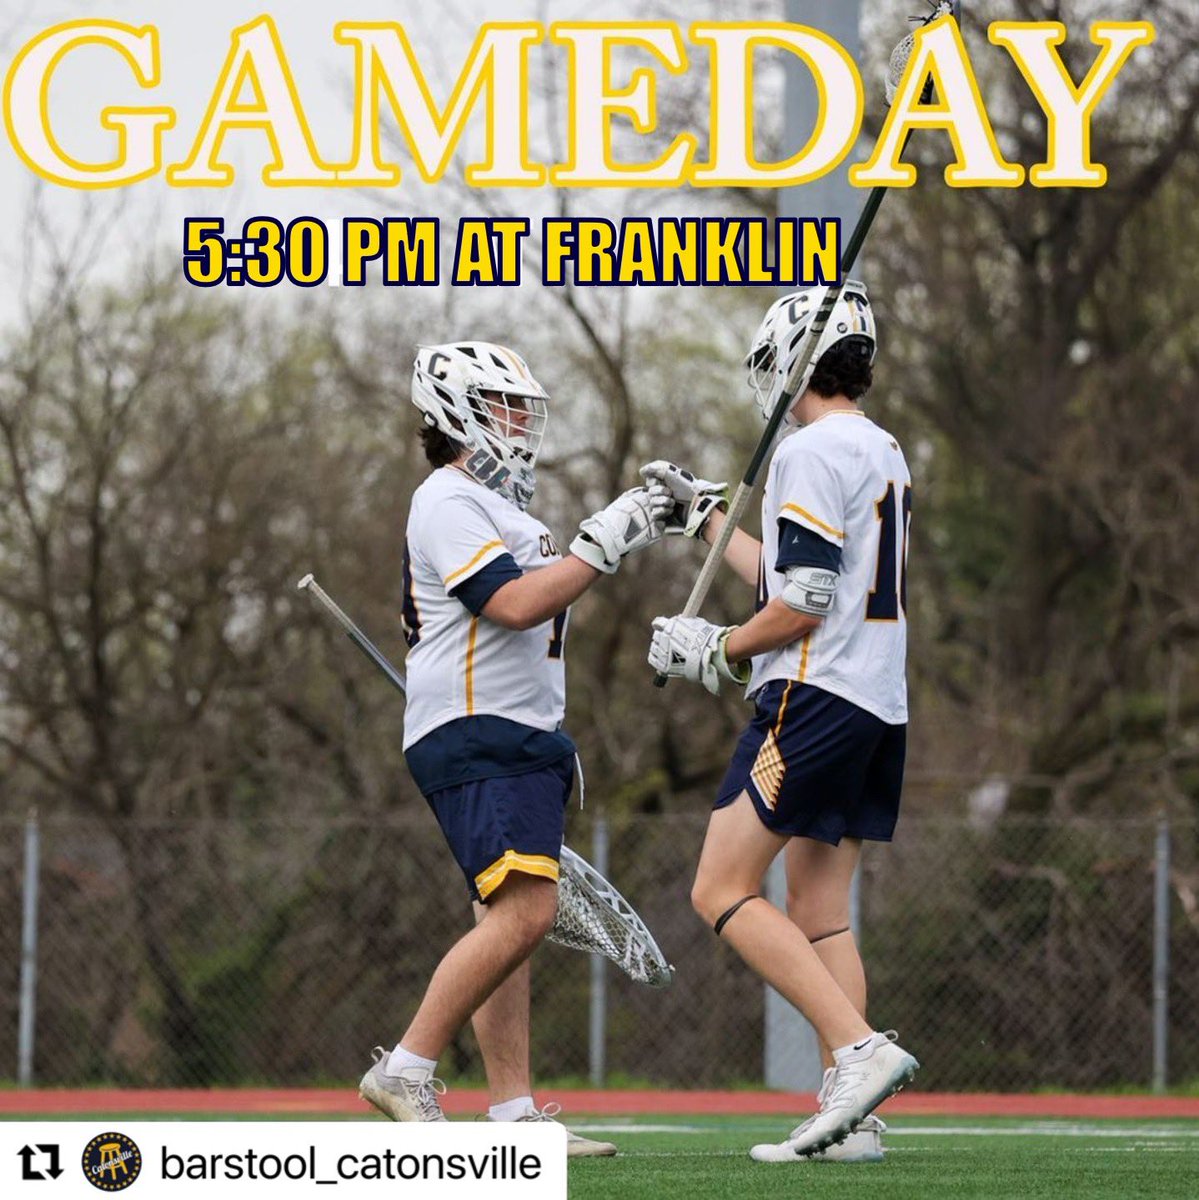 Correction: Game time is 5:30pm at Franklin!  
State Championship Tournament starts today!
Go Comets!
See you at Franklin at 5:30!